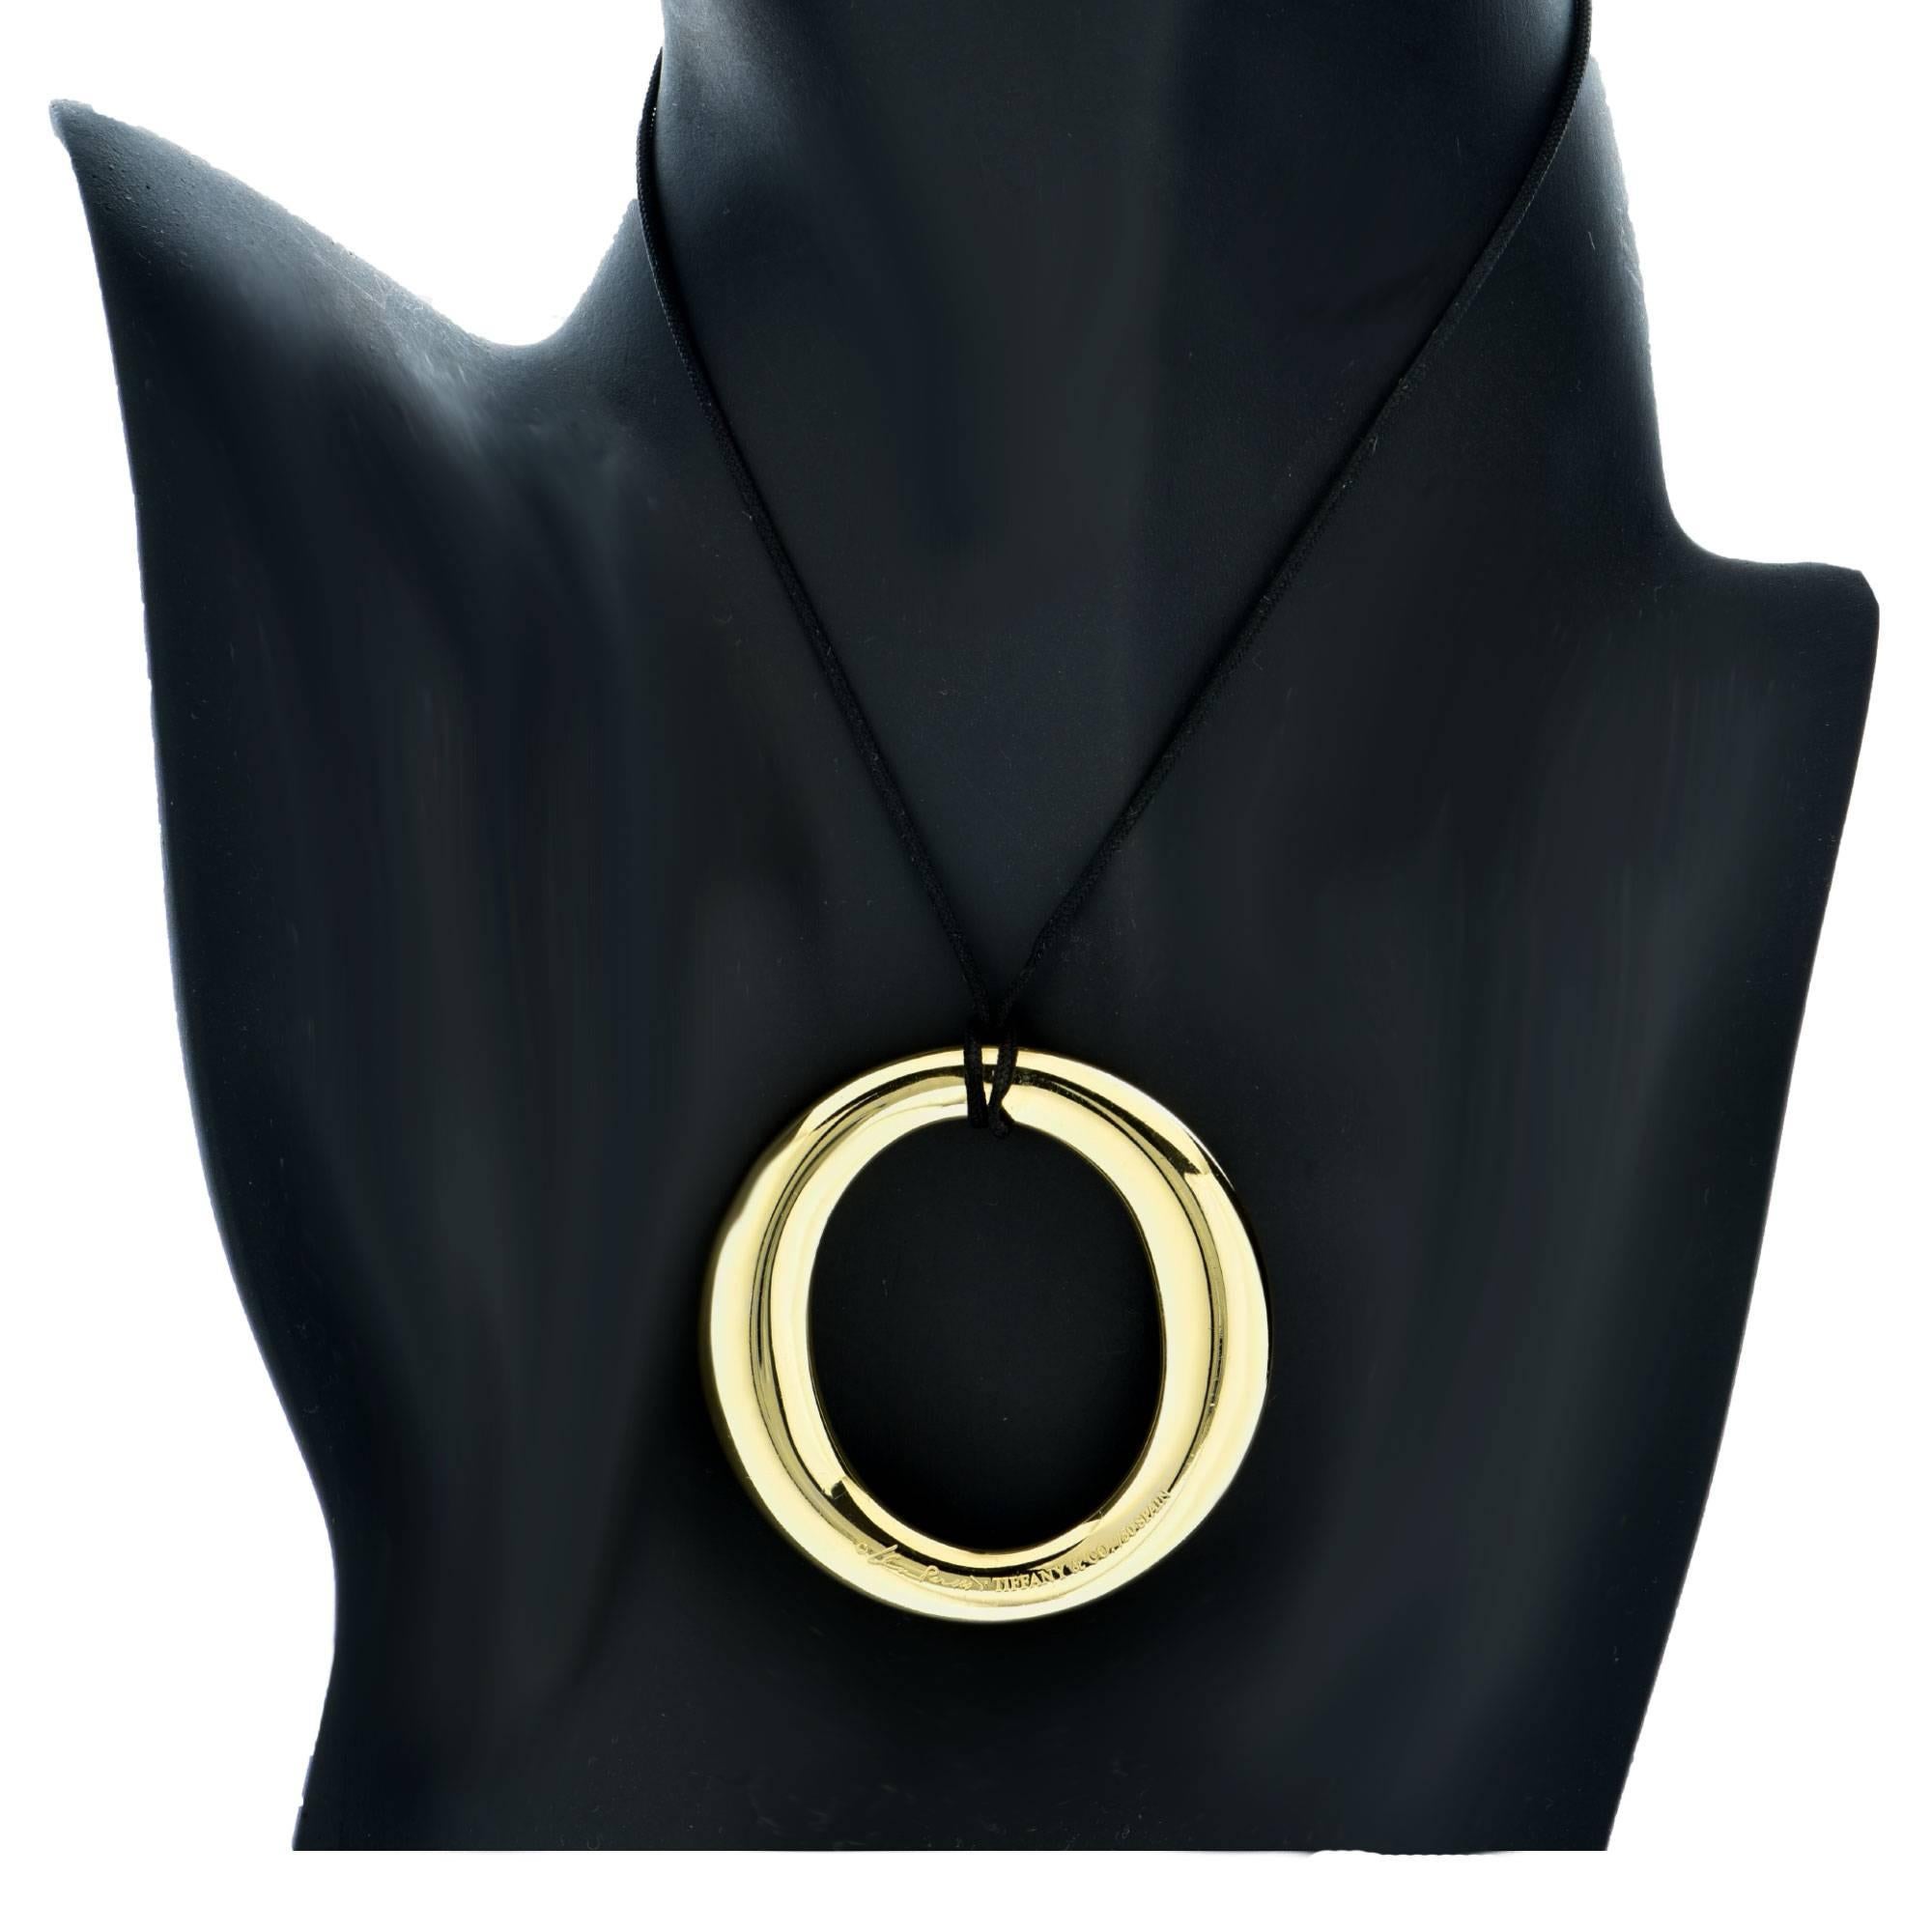 18k yellow gold Tiffany & Co. Paloma Picasso necklace.

It is stamped and tested as 18k gold.
The metal weight is 14.30 grams.

This gold necklace is accompanied by a retail appraisal performed by a GIA Graduate Gemologist.